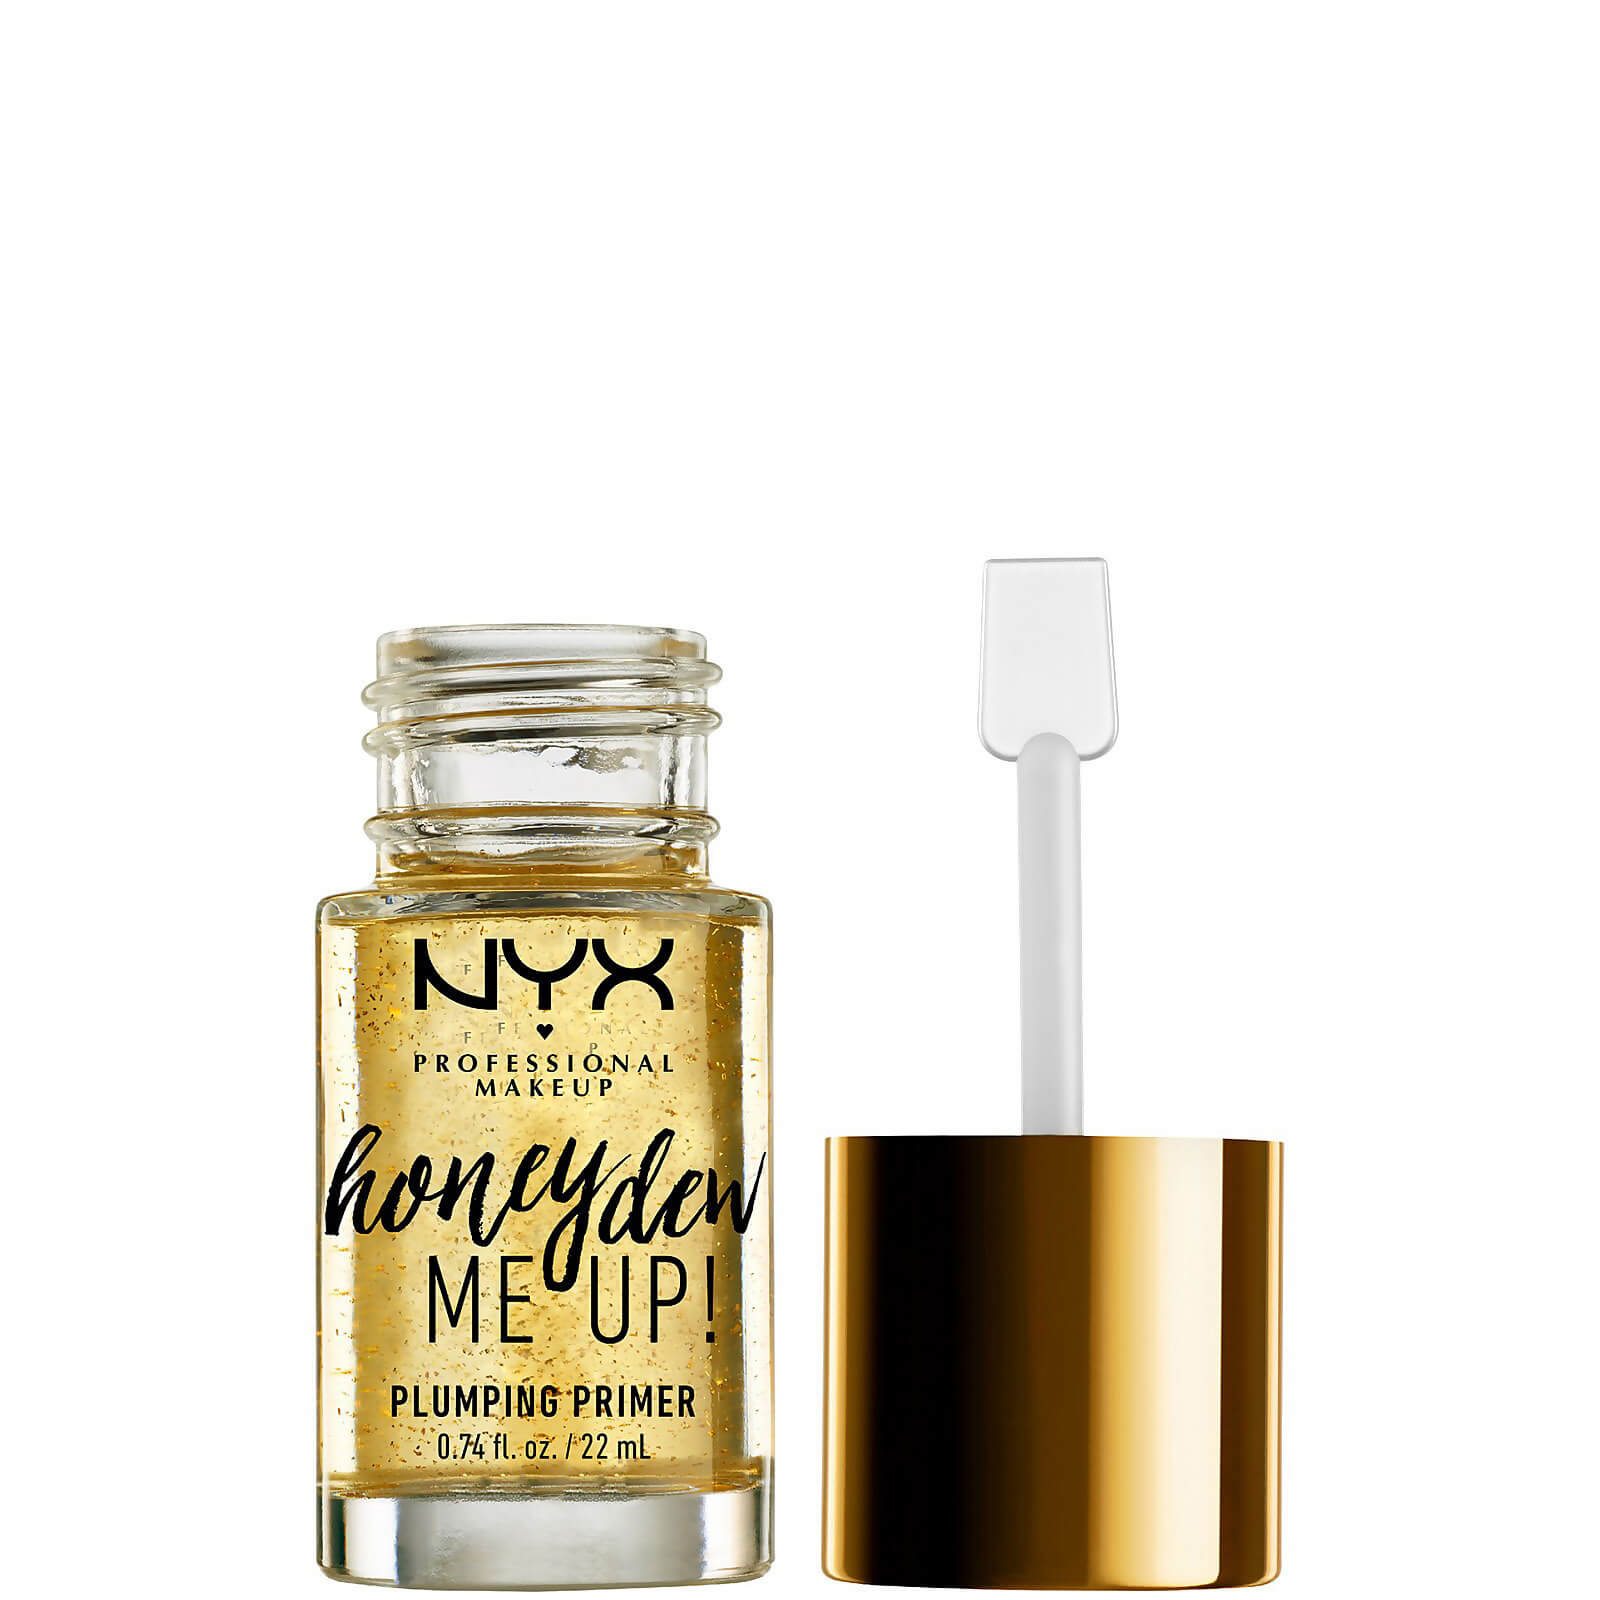 Image of NYX Professional Makeup Plumping Honey Dew Melon Infused Dew Me Up Face Primer 78.9g